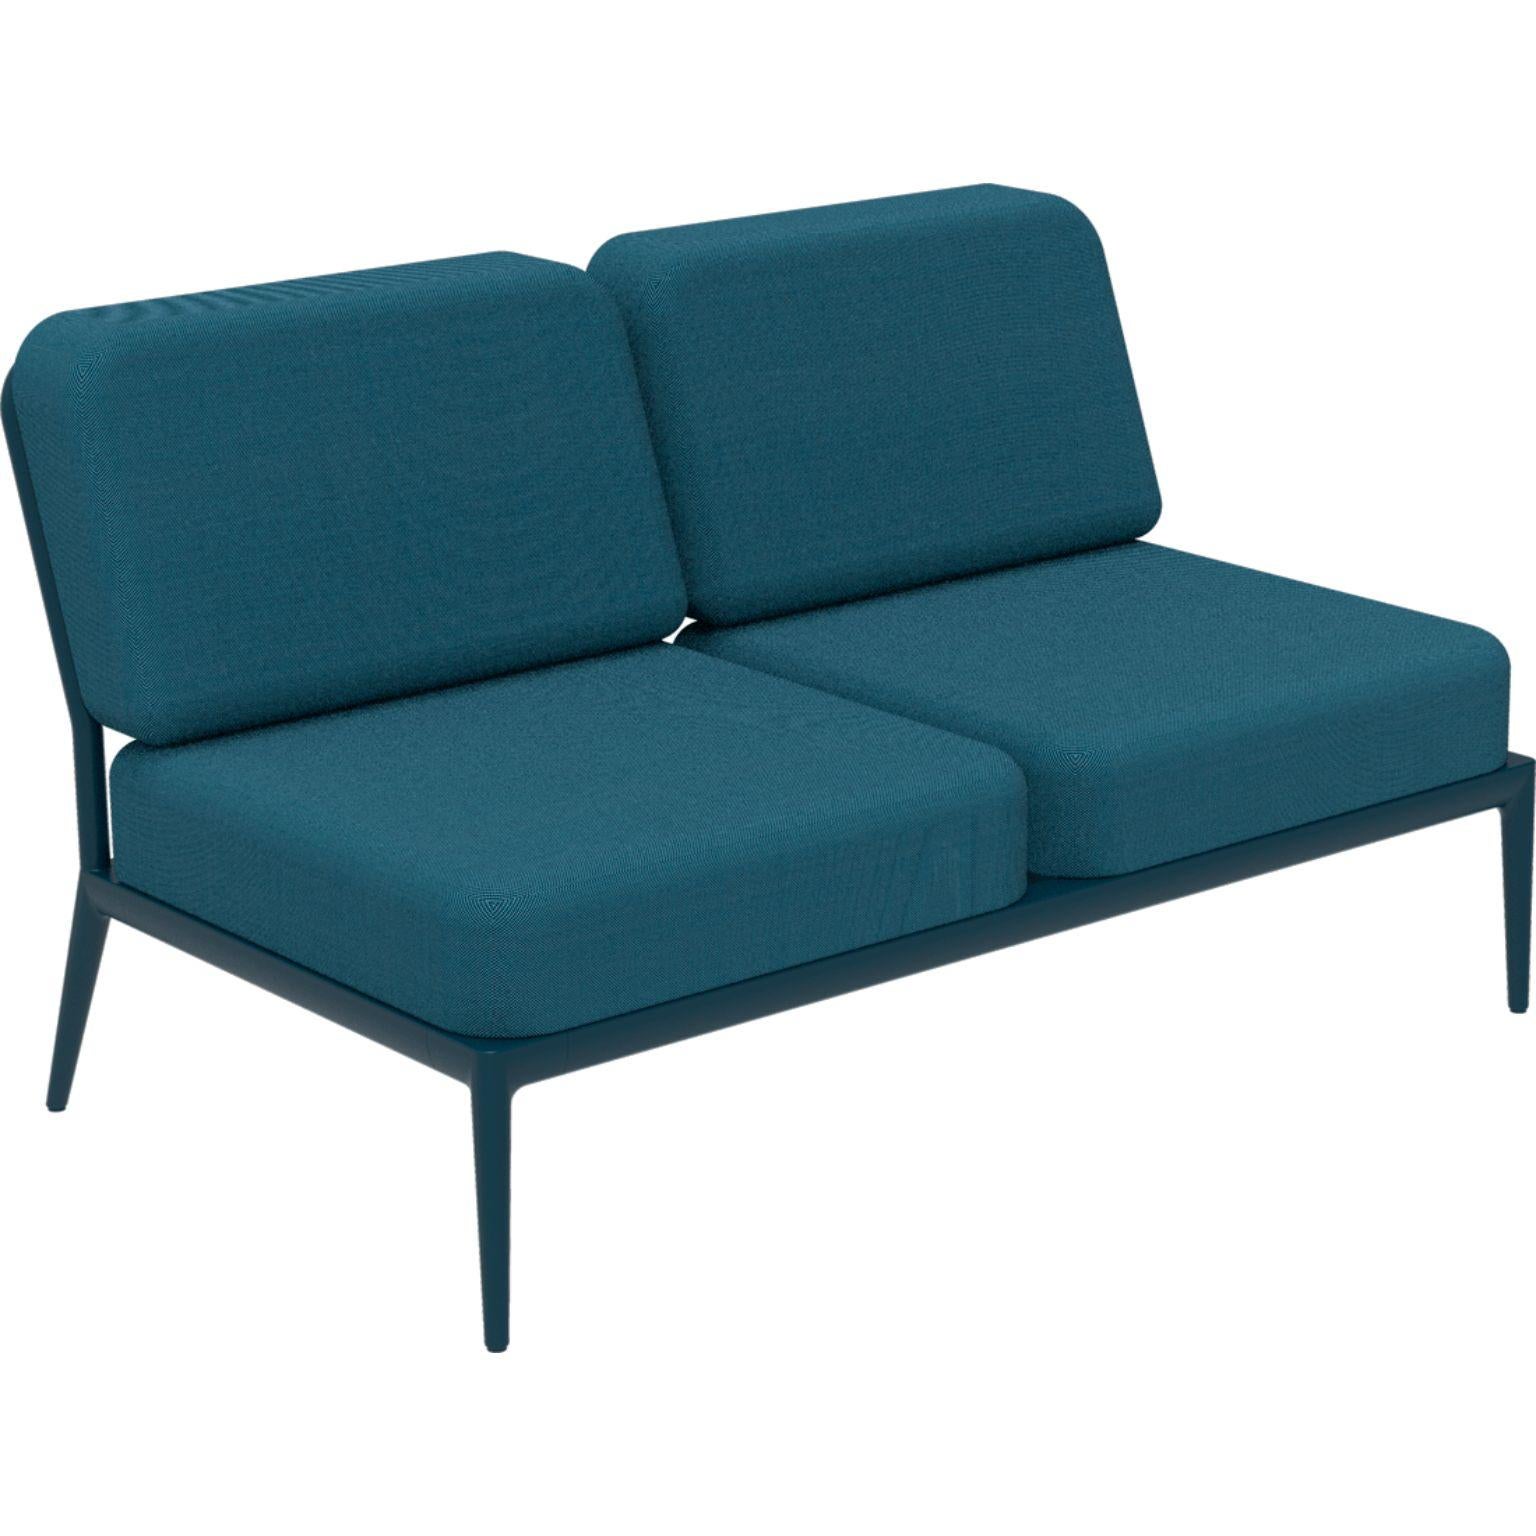 Nature navy double central modular sofa by MOWEE
Dimensions: D83 x W136 x H81 cm (seat height 42 cm).
Material: Aluminum and upholstery.
Weight: 27 kg.
Also available in different colors and finishes.

An unmistakable collection for its beauty